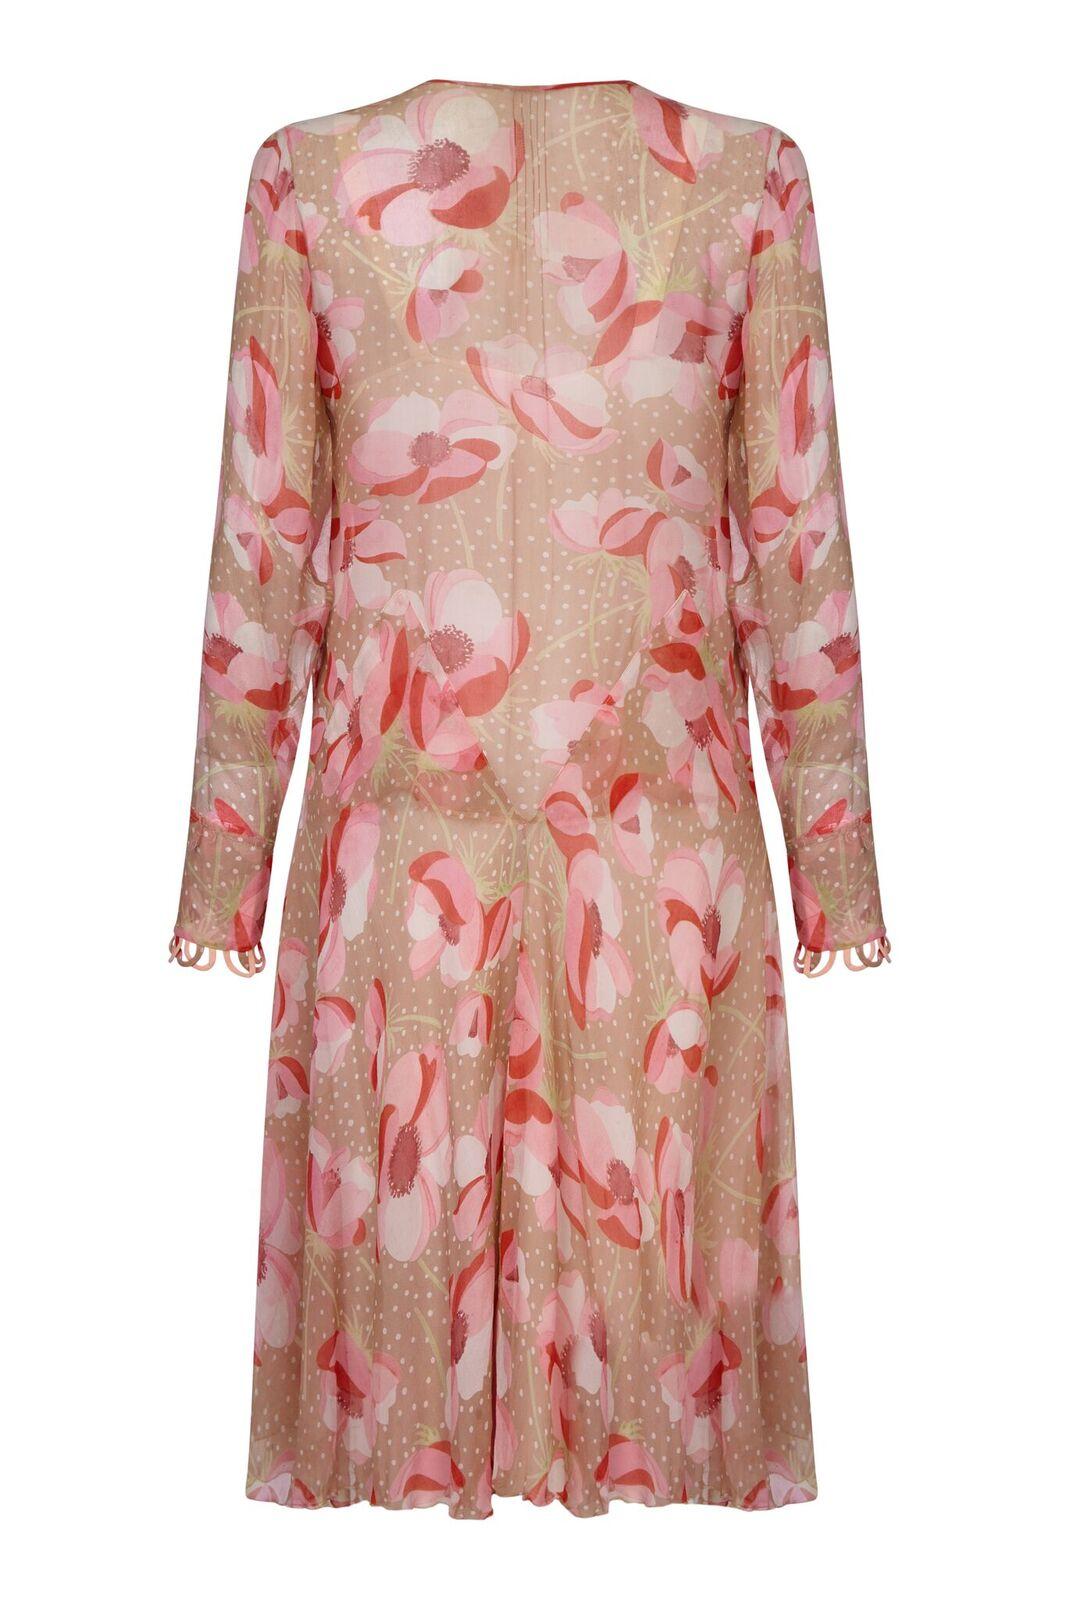 This charming 1920s silk chiffon floral print dress is delicate, feminine and in beautiful vintage condition. The sheer chiffon fabric hosts a bold poppy design in soft pink shades over a warm fawn backdrop and has an air of understated modernity.